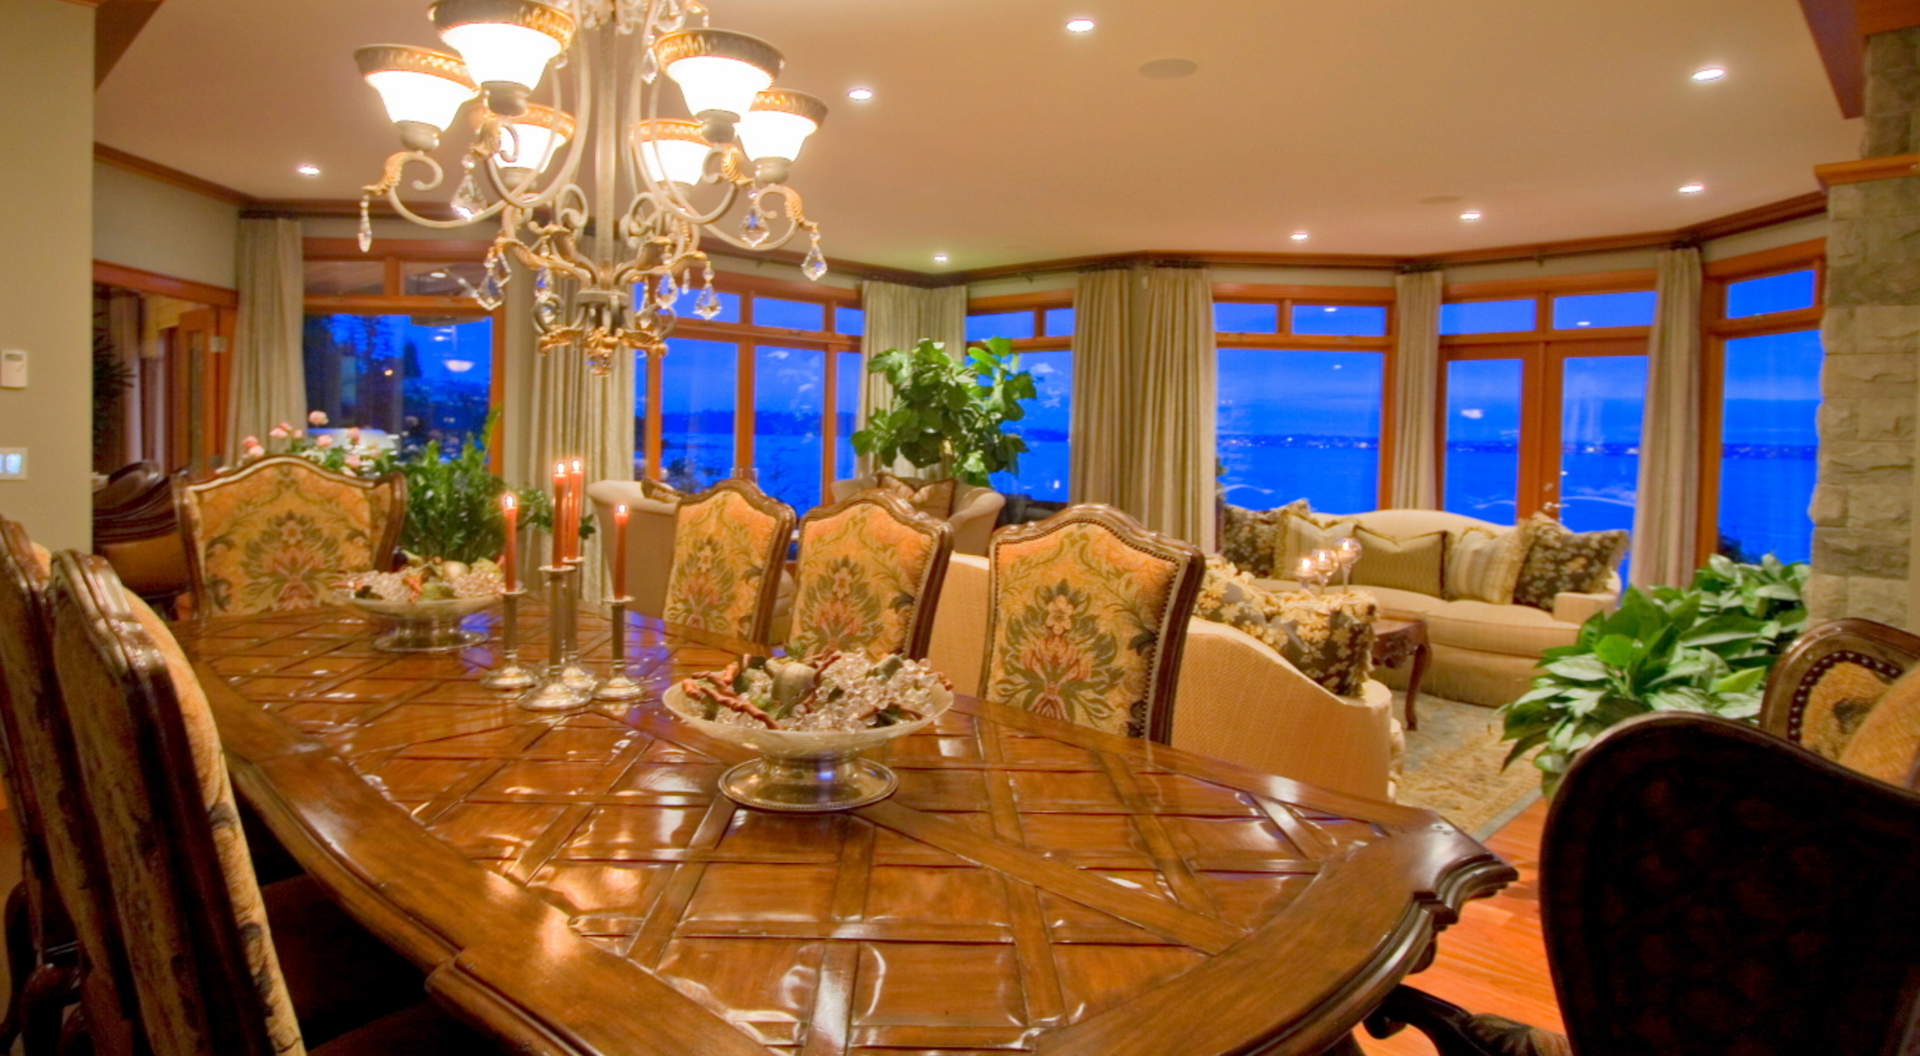 Large Entertainment Sized Dining Room